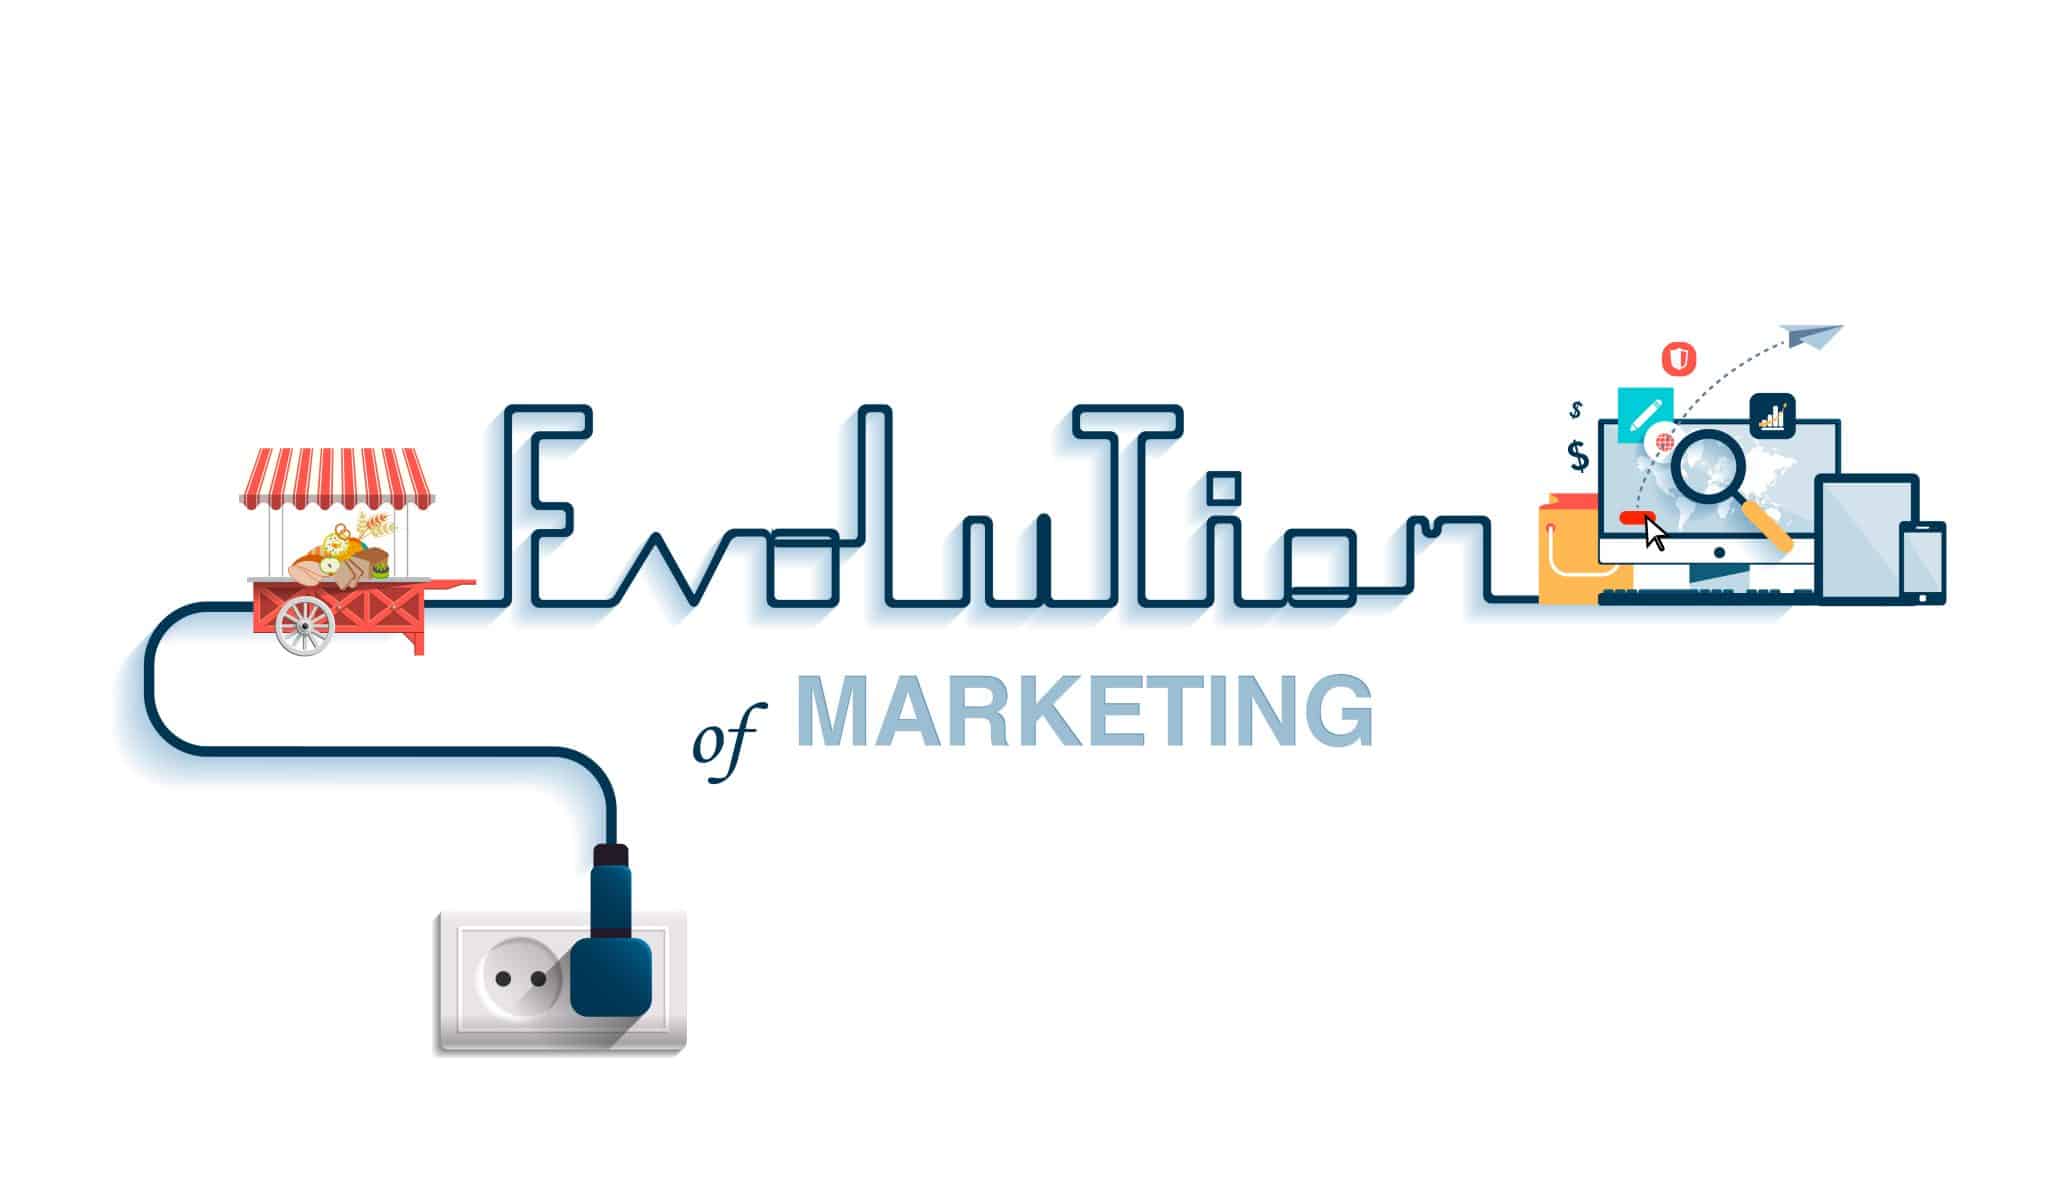 The Evolution of Marketing scaled